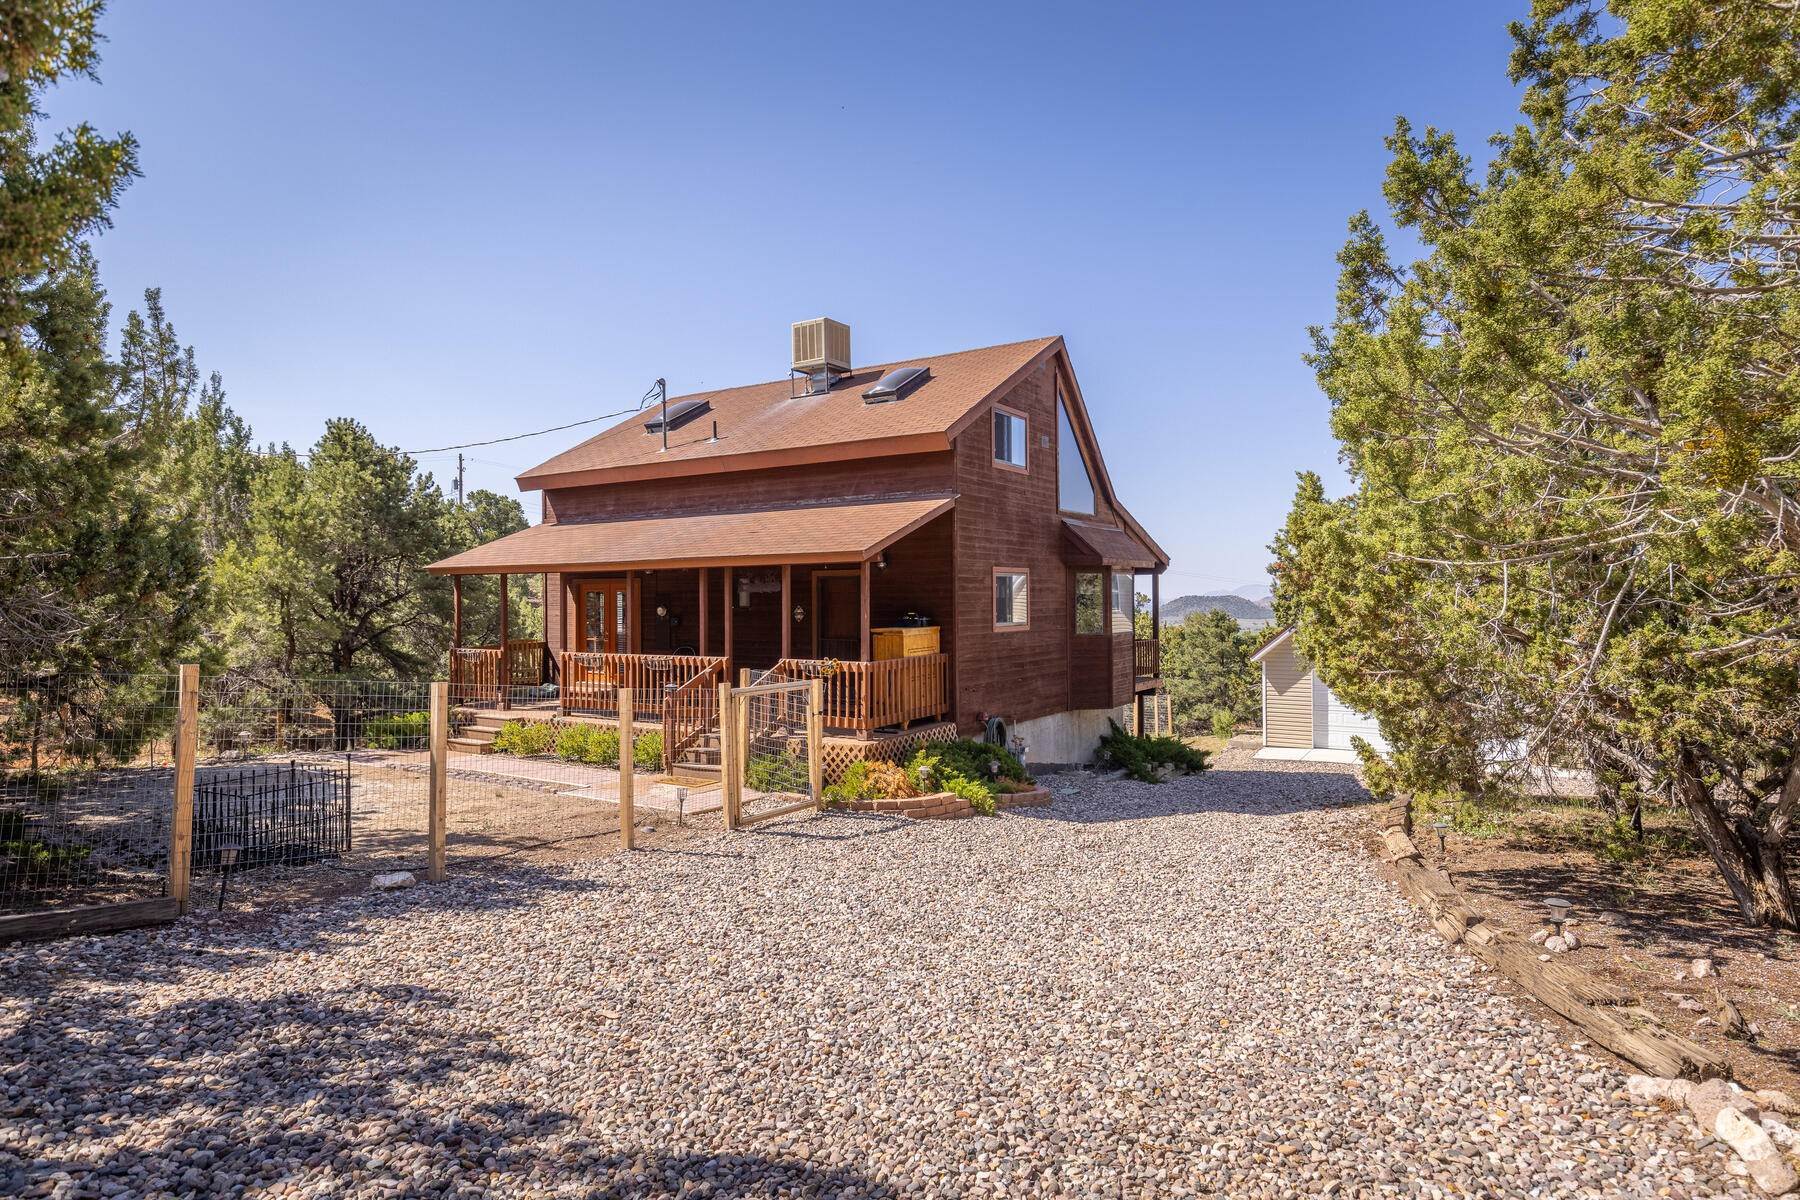 Single Family Homes for Sale at Cozy Cabin In Central 682 E Mule Deer Road Central, Utah 84722 United States